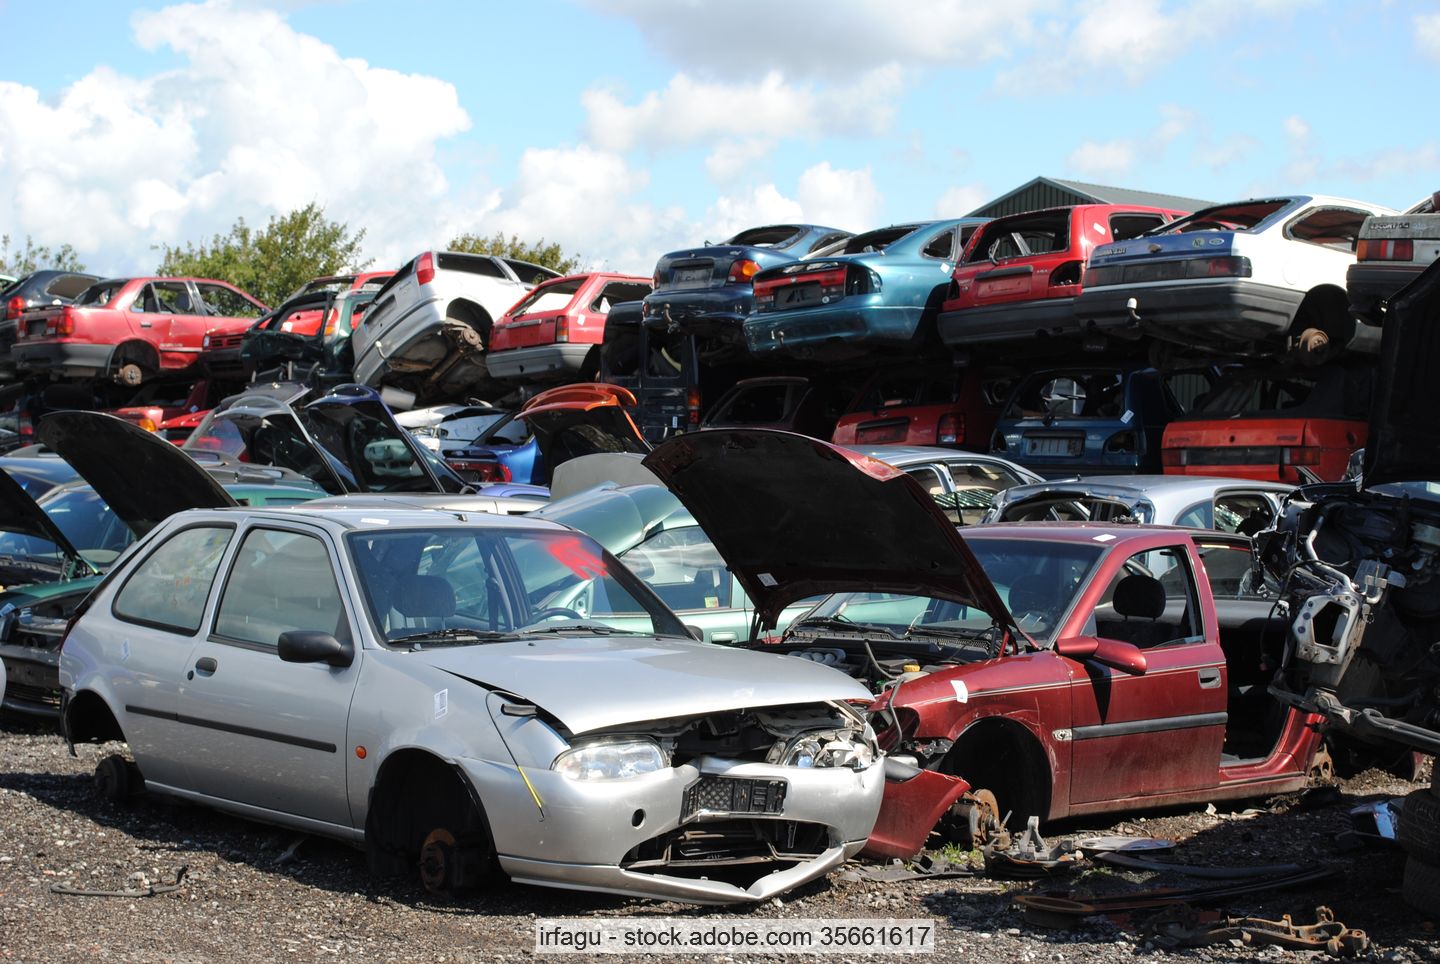 Scrap yard with end-of-life cars